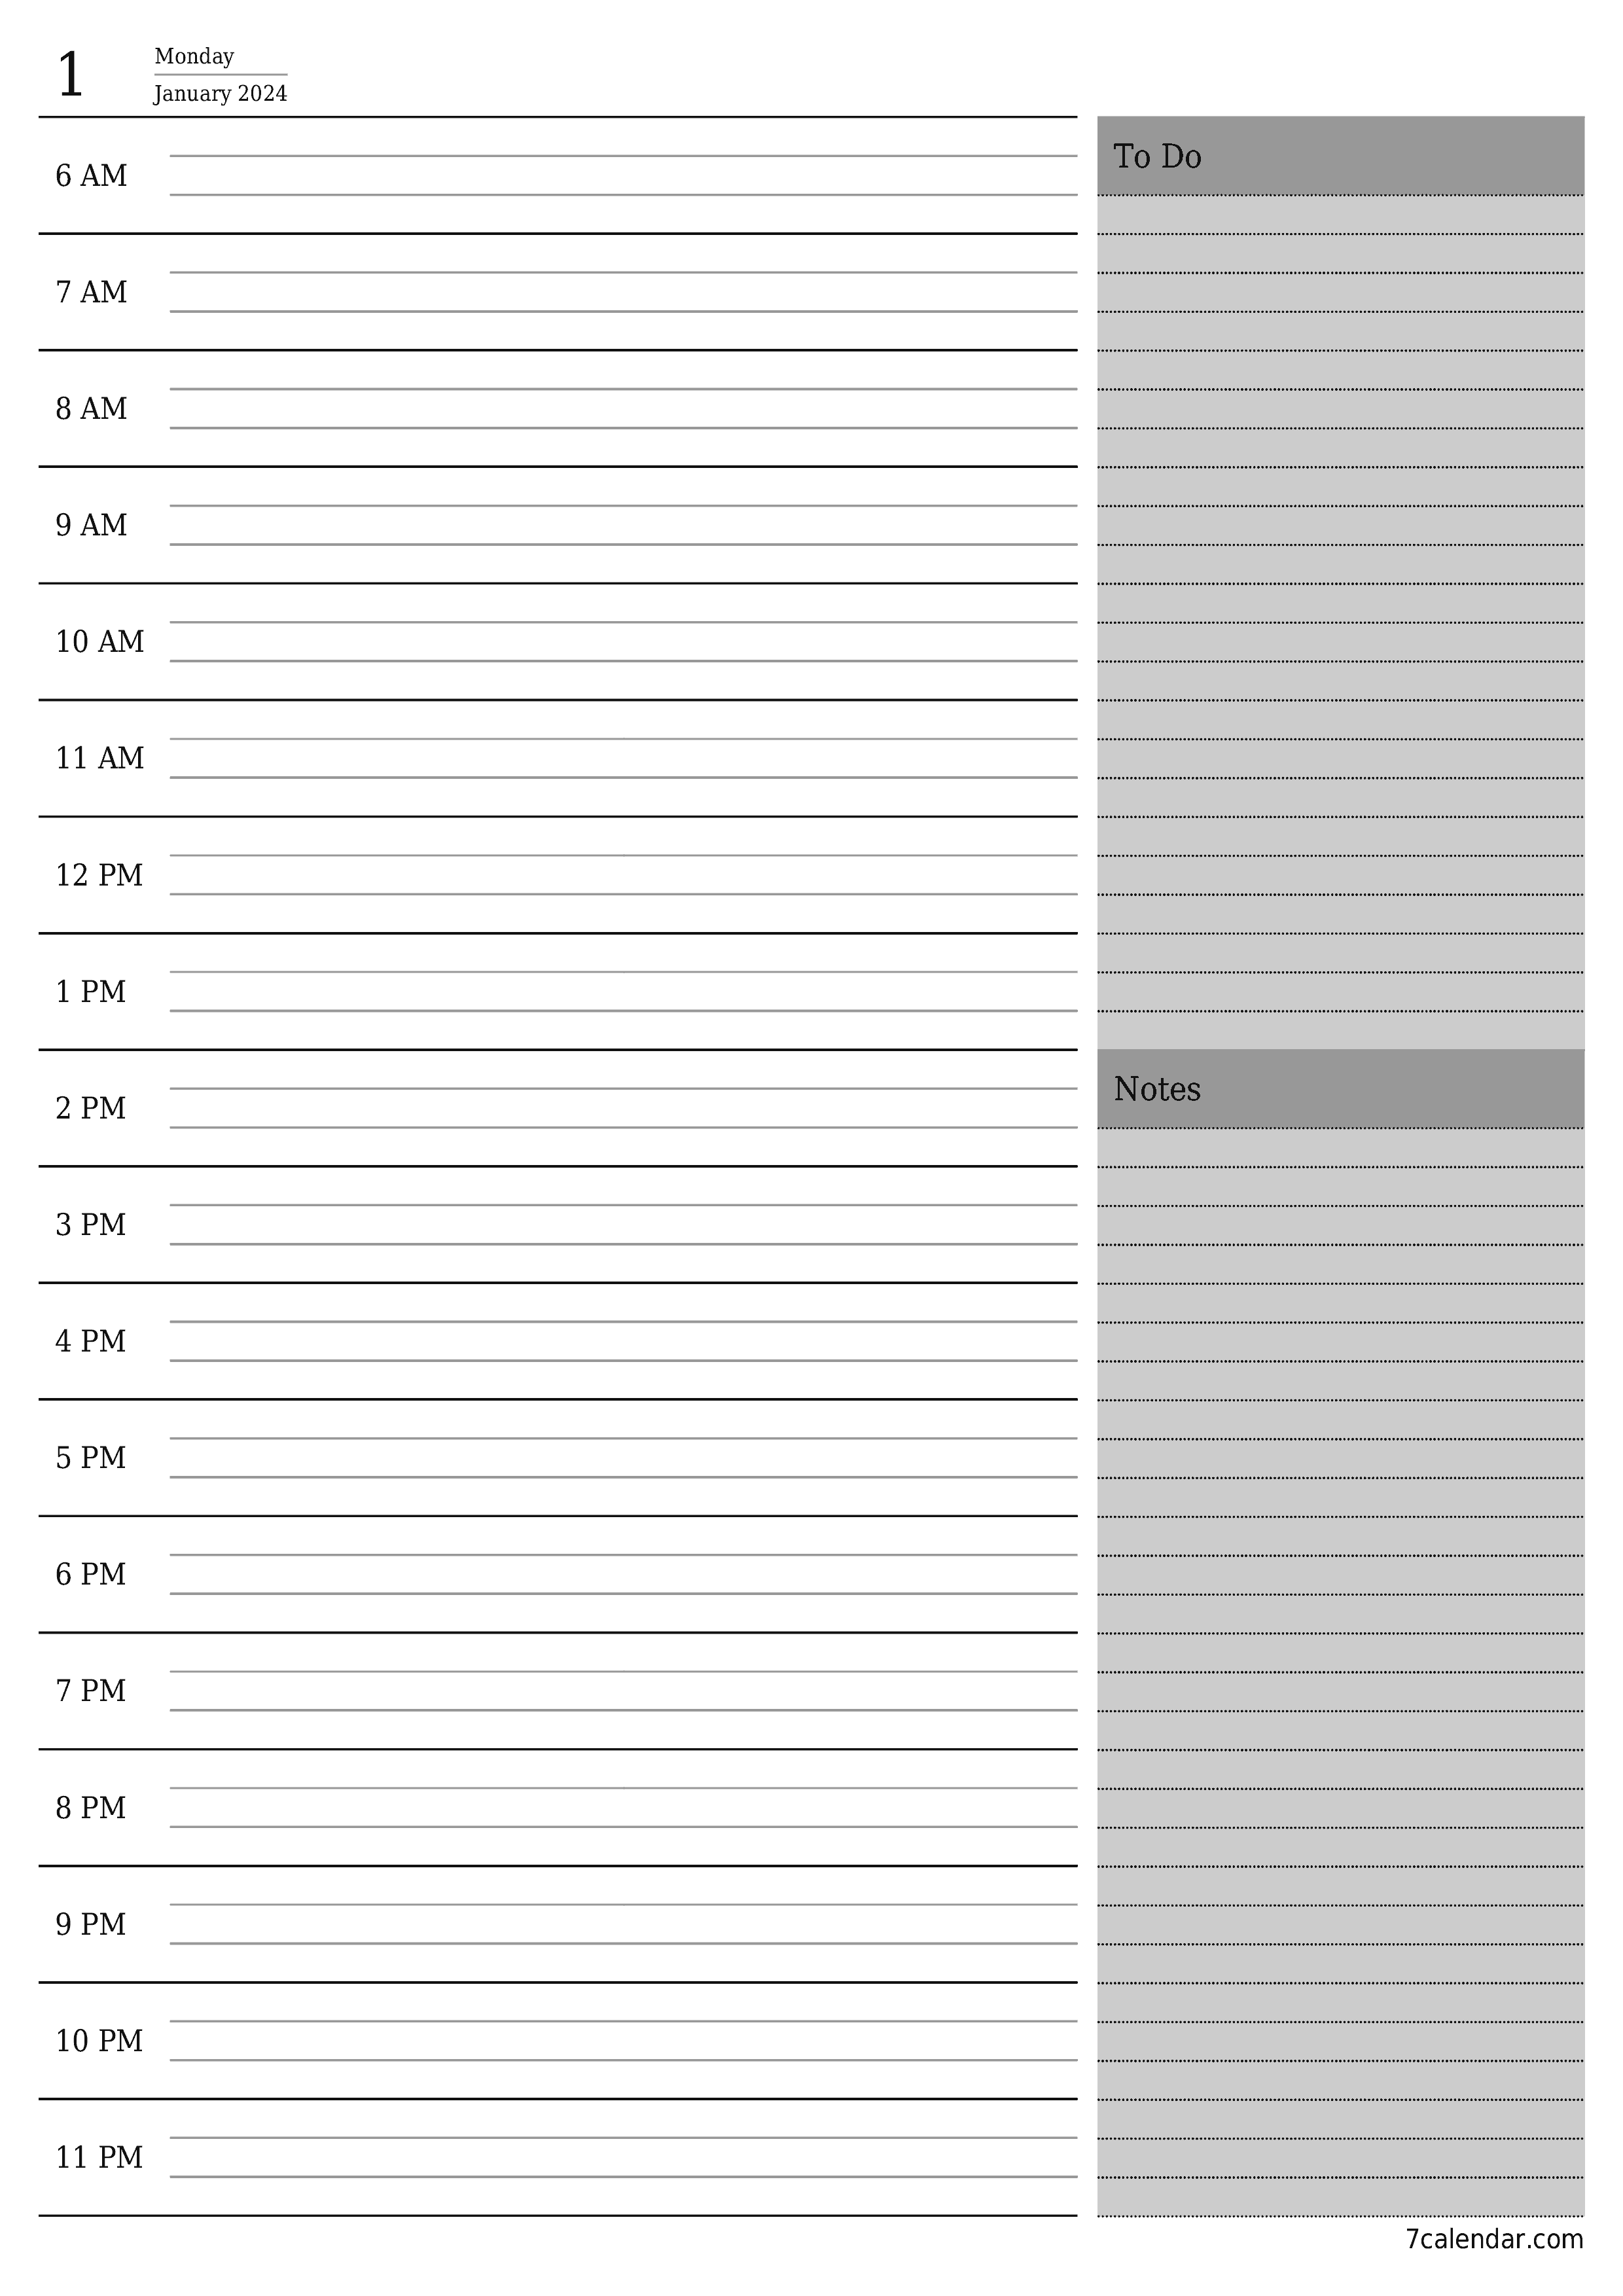 Blank daily printable calendar and planner for day January 2024 with notes, save and print to PDF PNG English